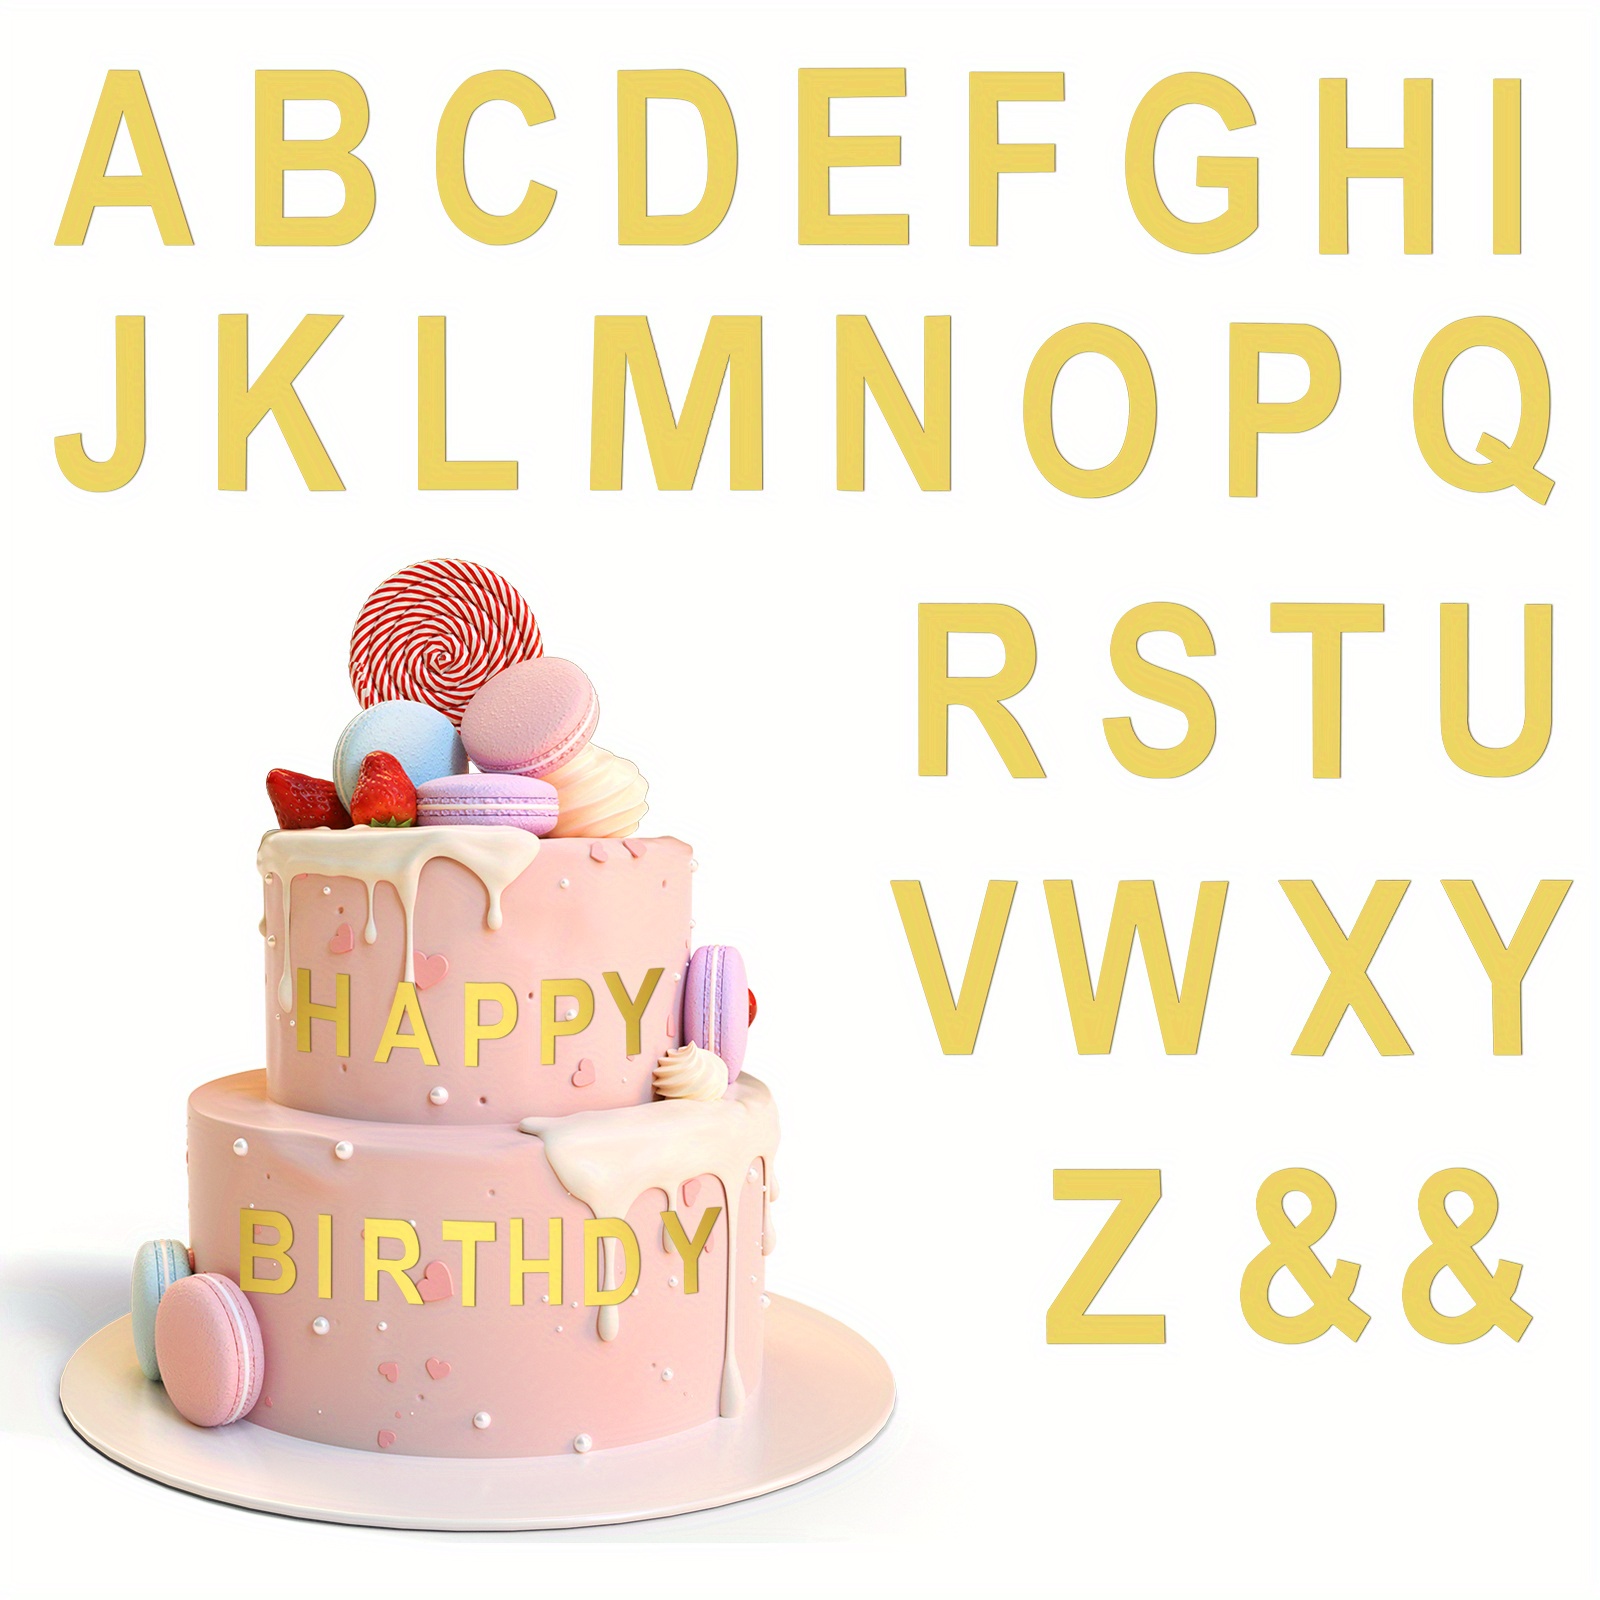 Personalized Name Birthday Cake Topper, 2nd Birthday Party Decor